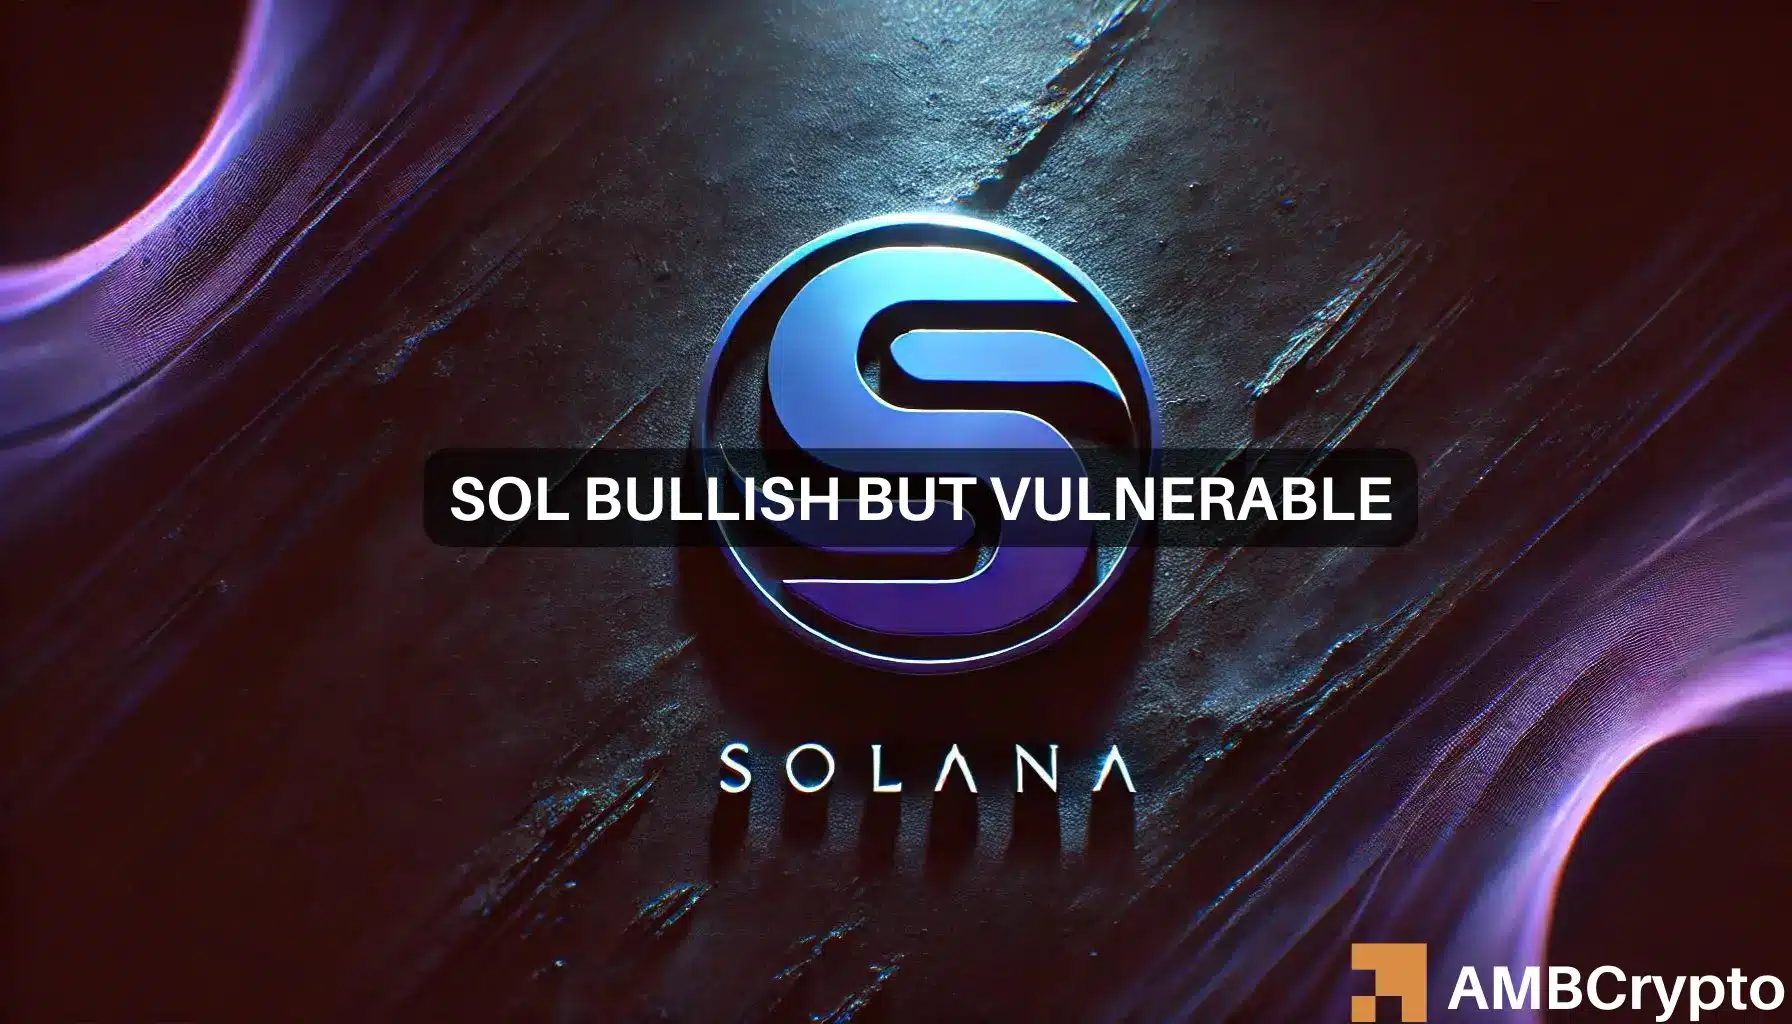 Solana bulls stalled at $170 – Should traders anticipate a move past $200?